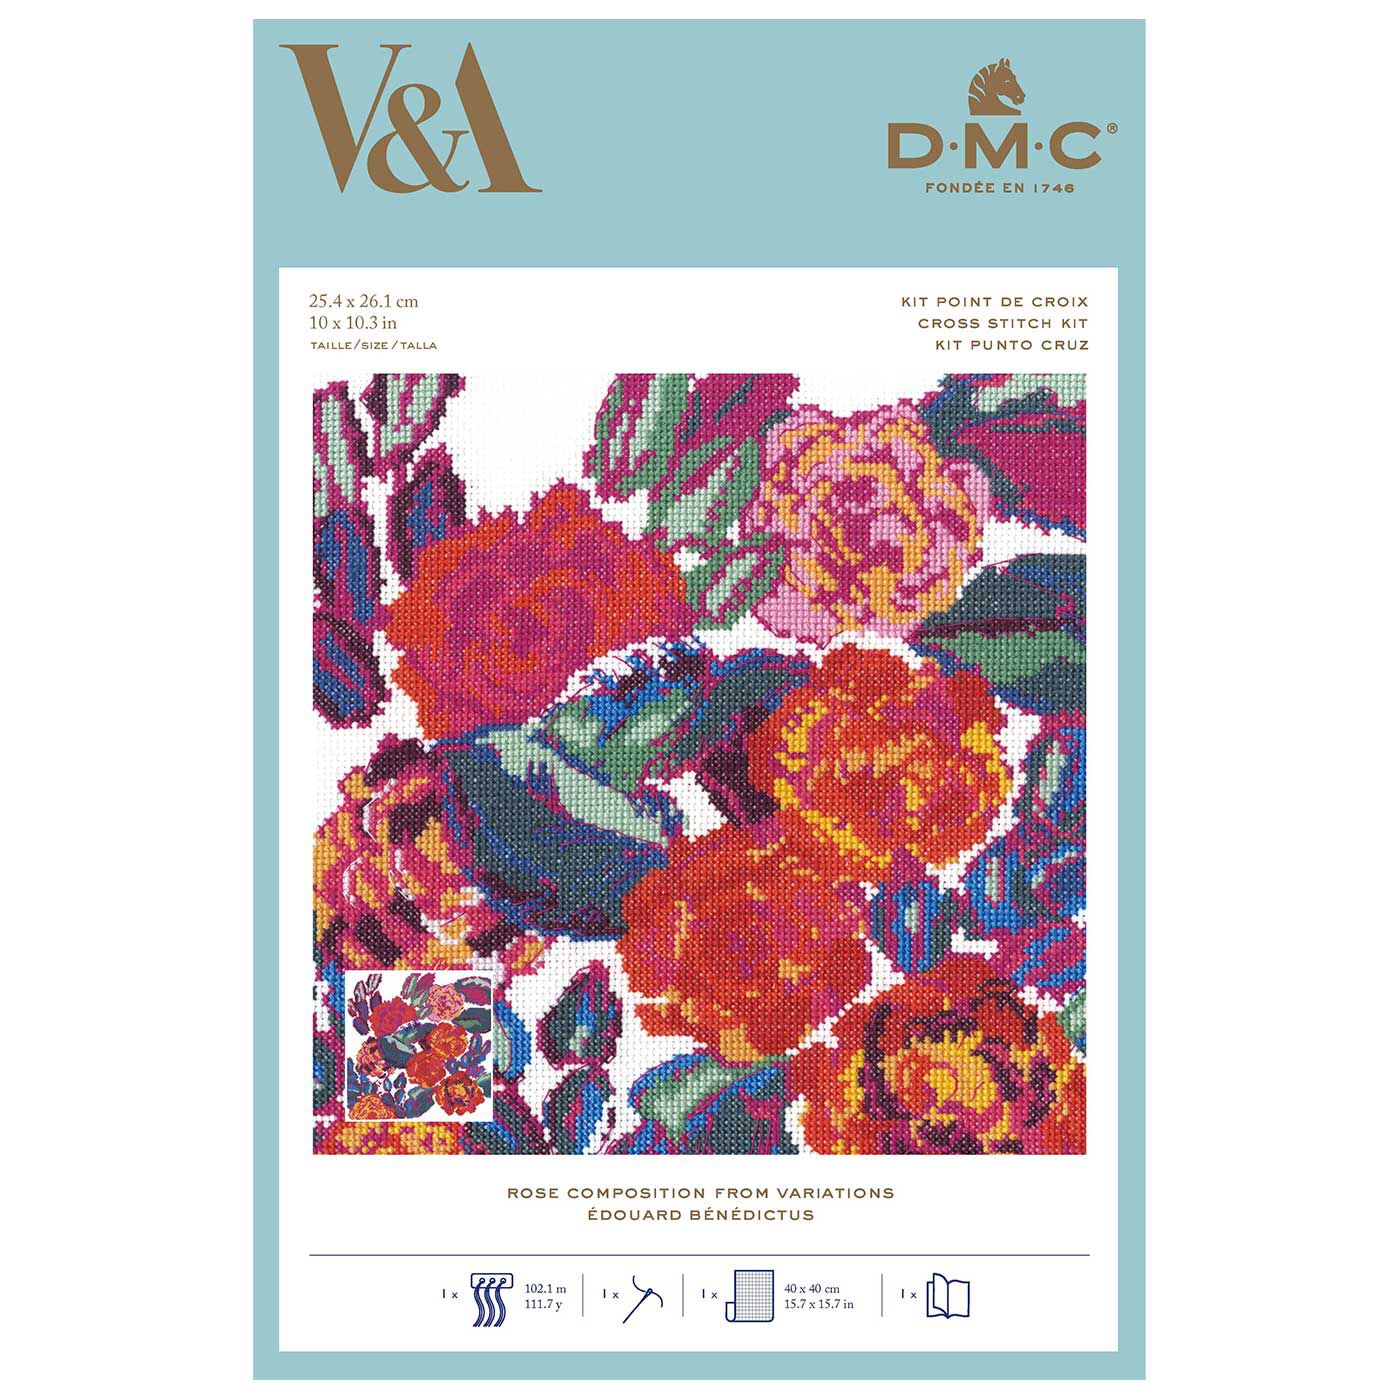 Couturier special|ＤＭＣ×Ｖ＆Ａ アールデコシリーズ 「Rｏｓｅ ｃｏｍｐｏｓｉｔｉｏｎ」クロスステッチキット